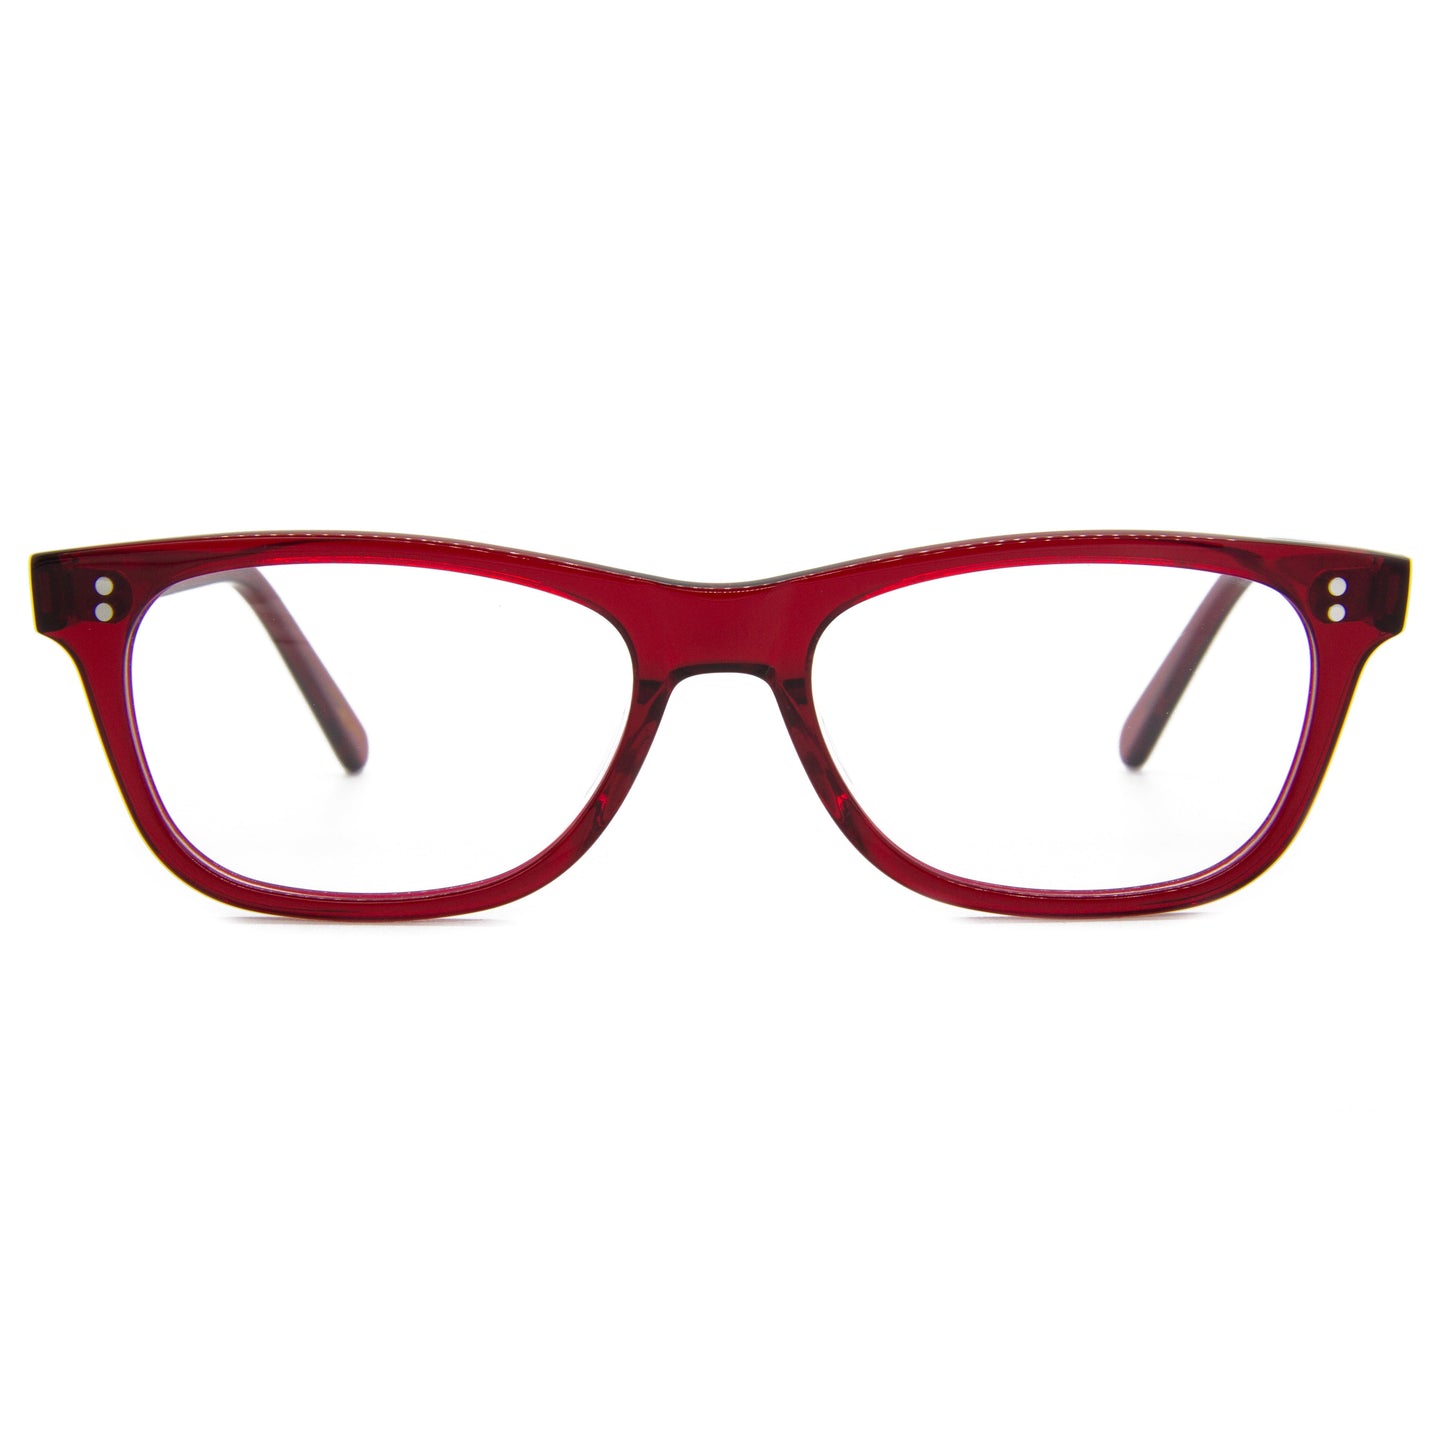  3 brothers - Mish - Red - Prescription Glasses